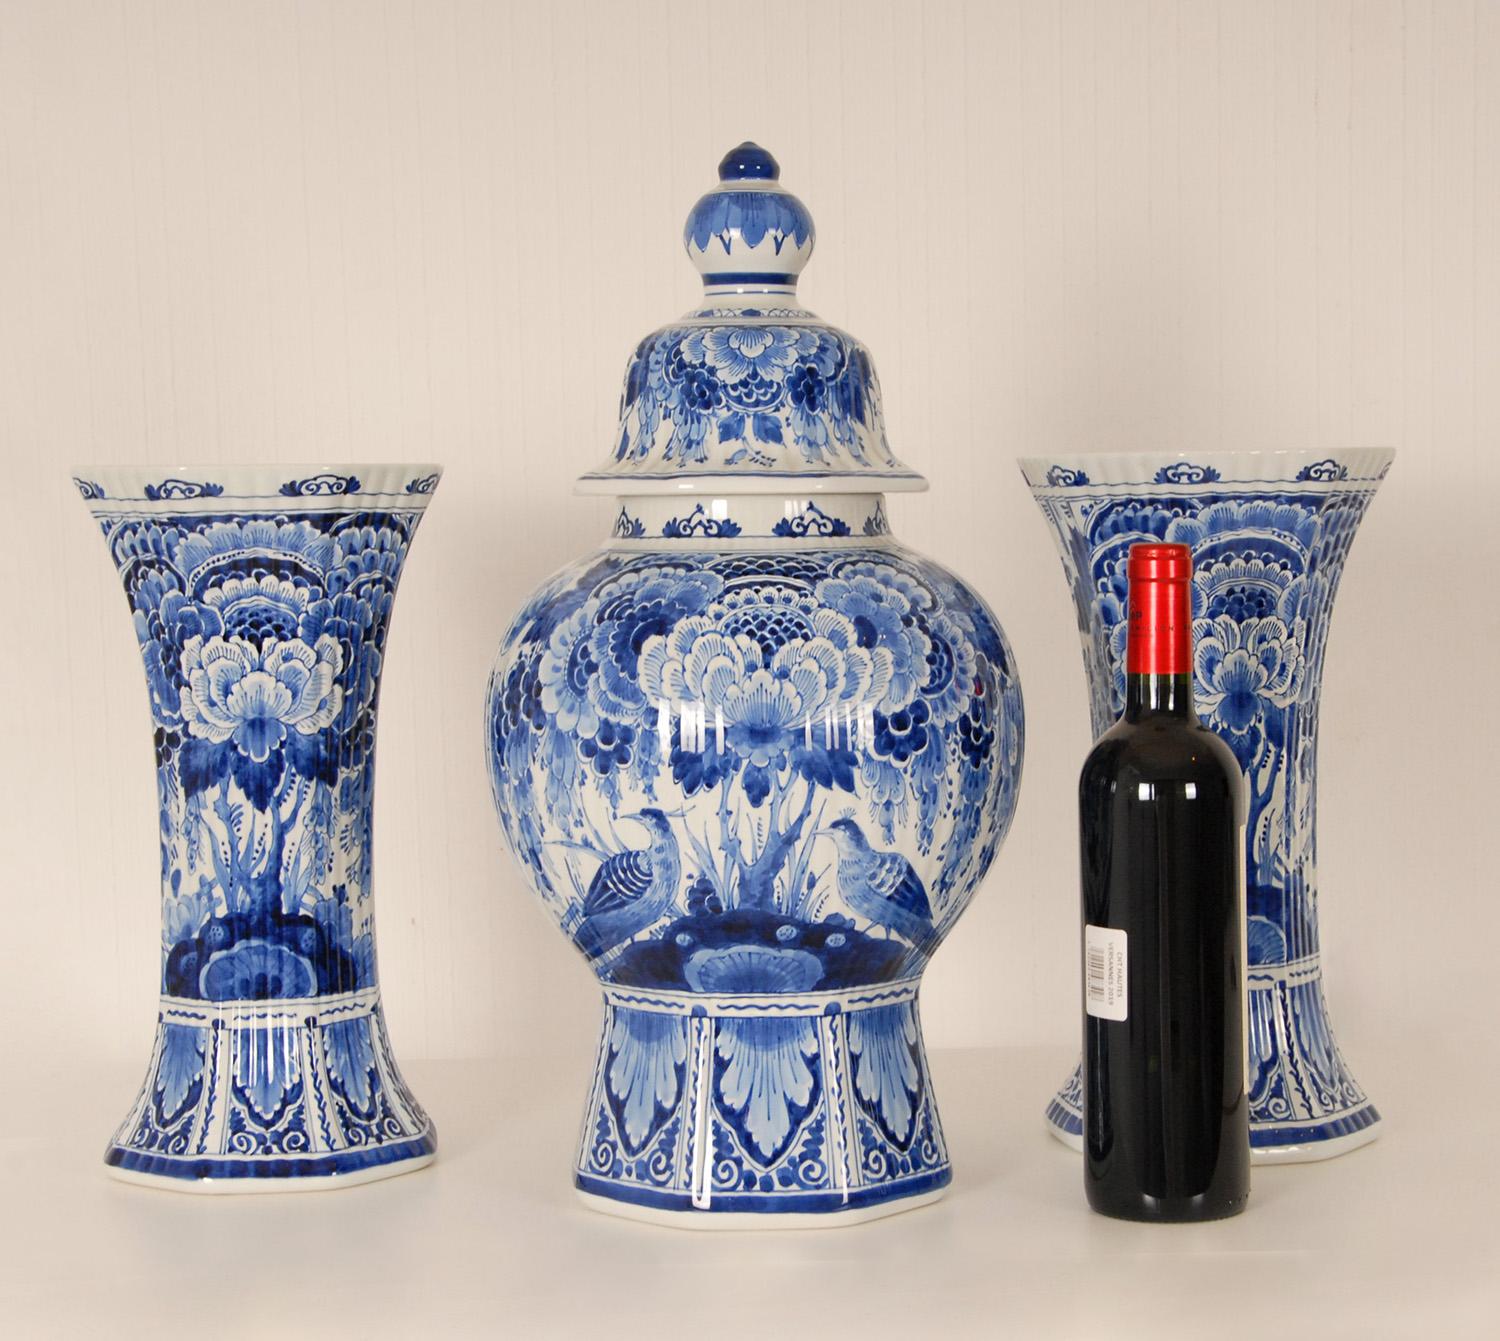 A 3 pieces garniture of Dutch Delftware Royal Delft vases - Urns.
Tall decorative covered baluster vases on an octagonal foot with 2 matching beaker vases
The vases are hand crafted and hand painted in enchanting blue colors, blue camaieu.
Floral